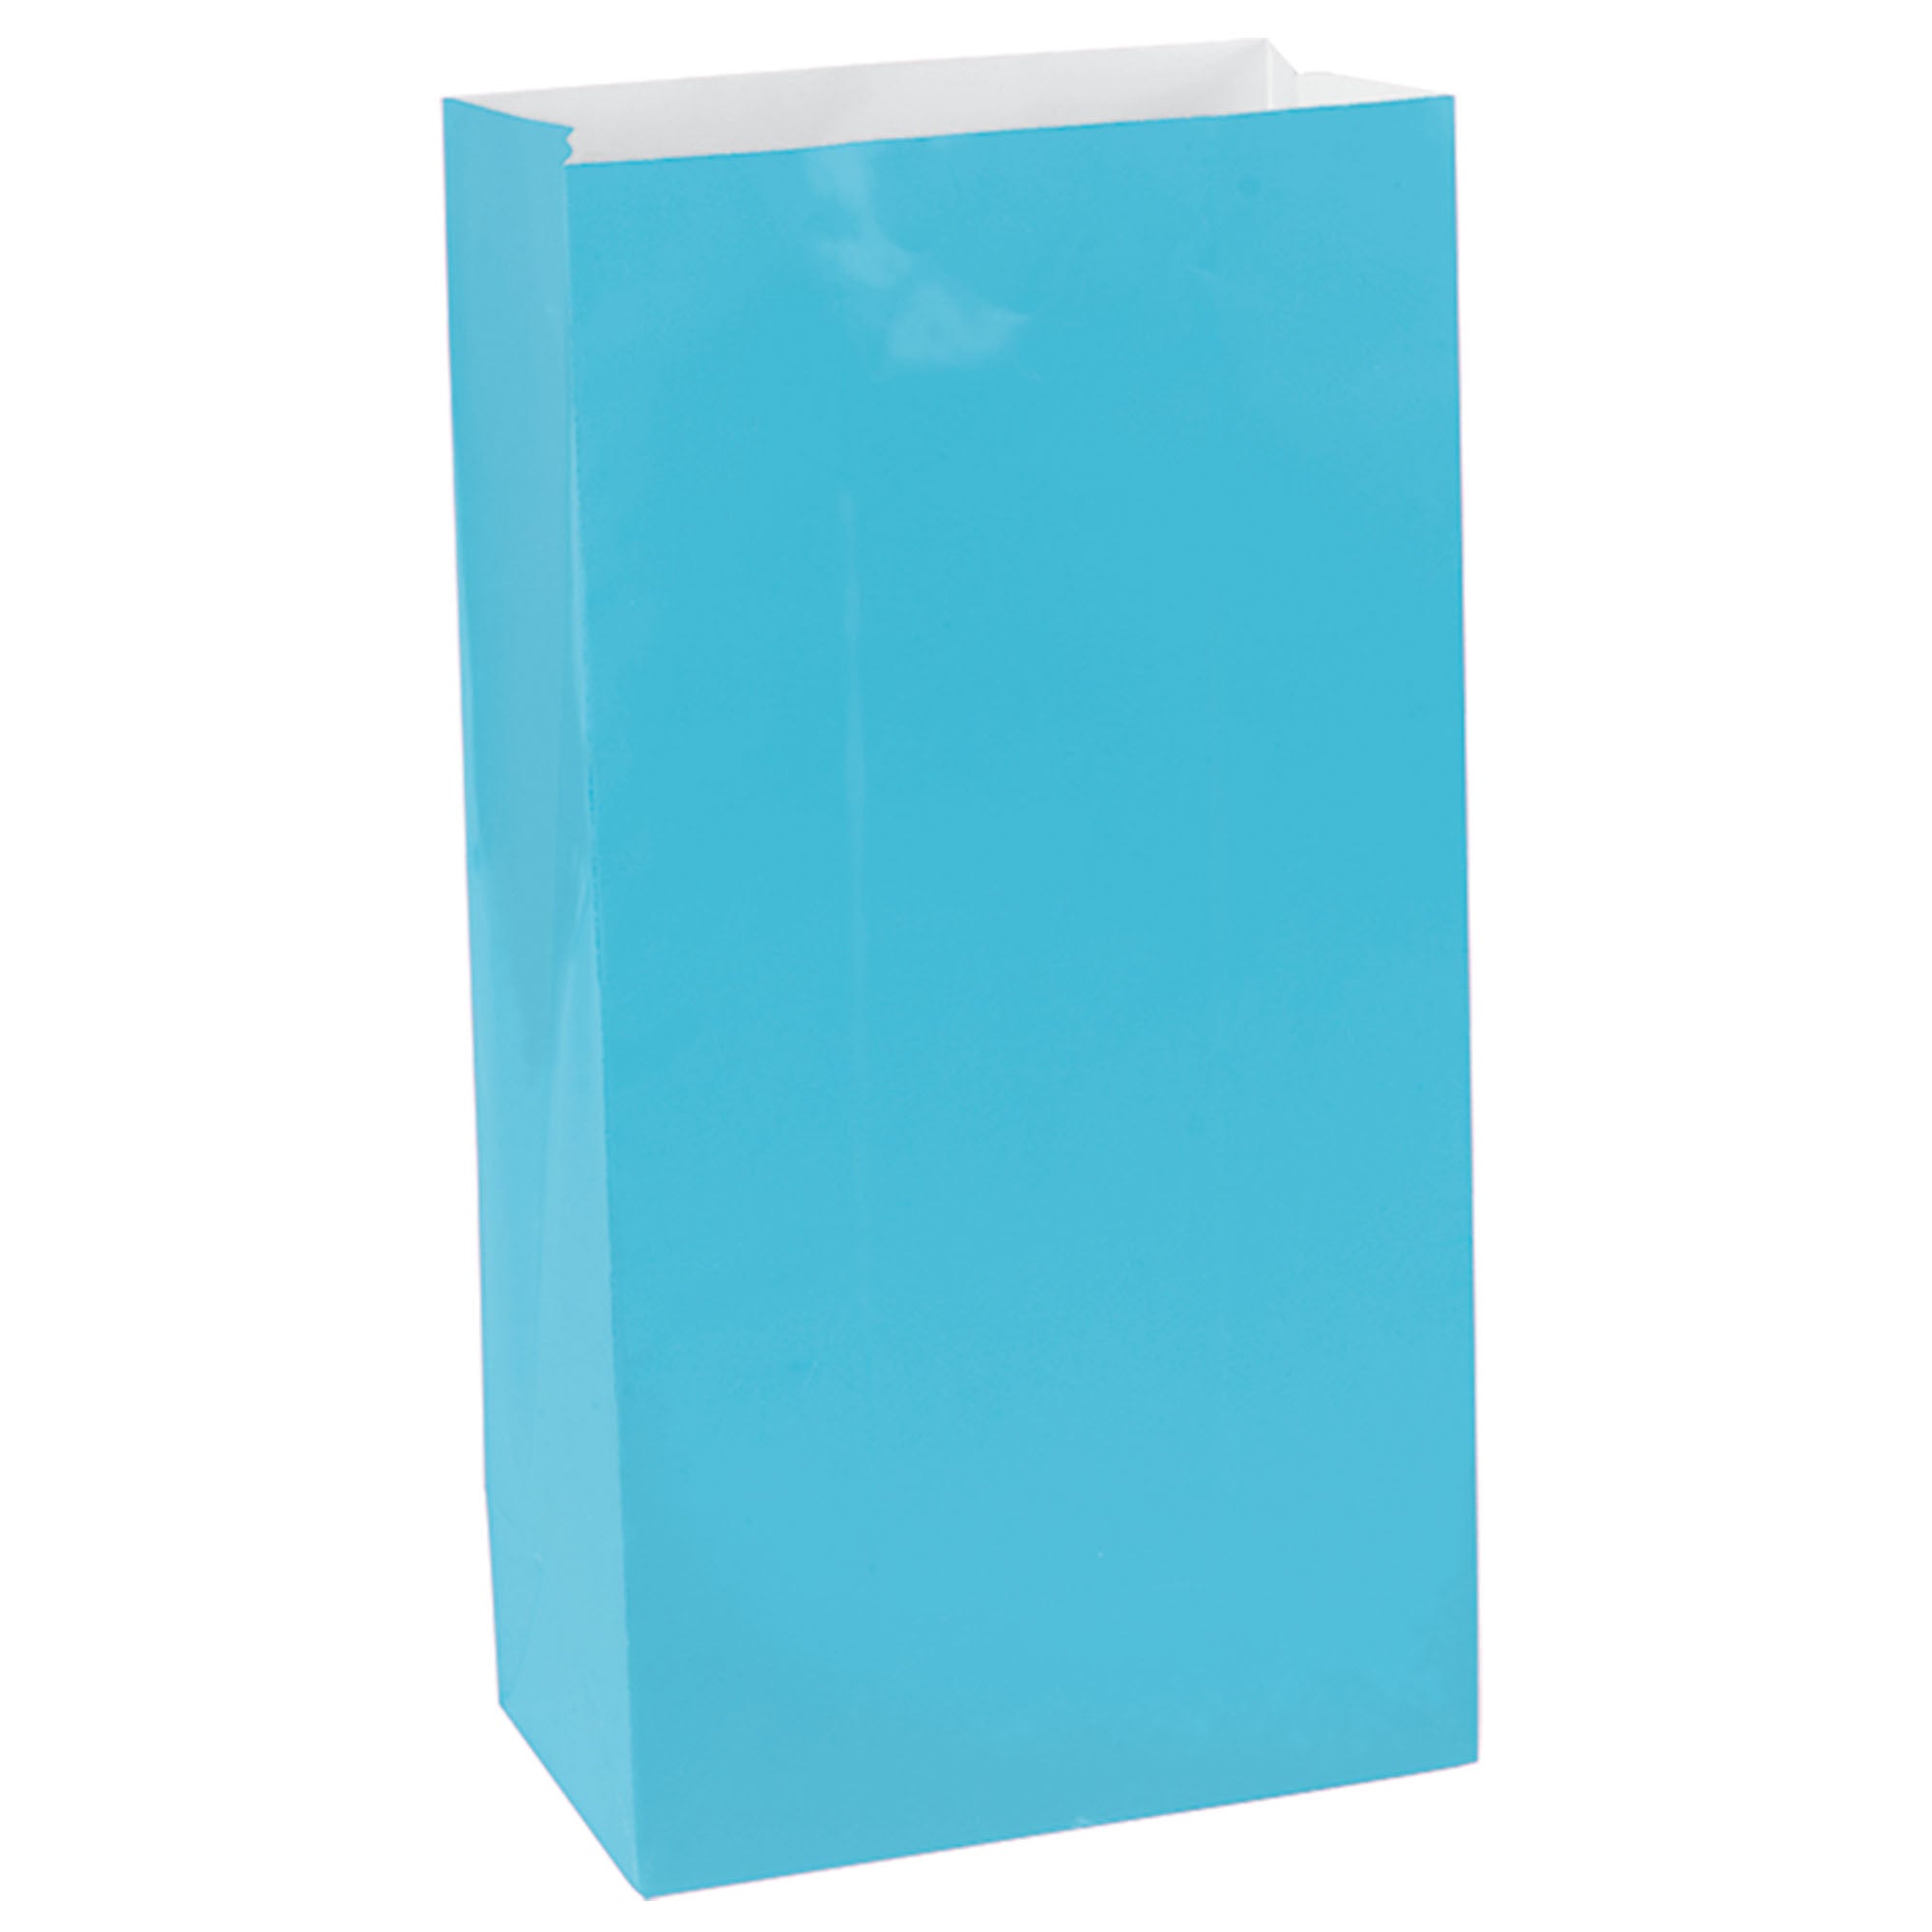 12 Mini Packaged Paper Bags  Caribbean Blue  6.5x3x2in